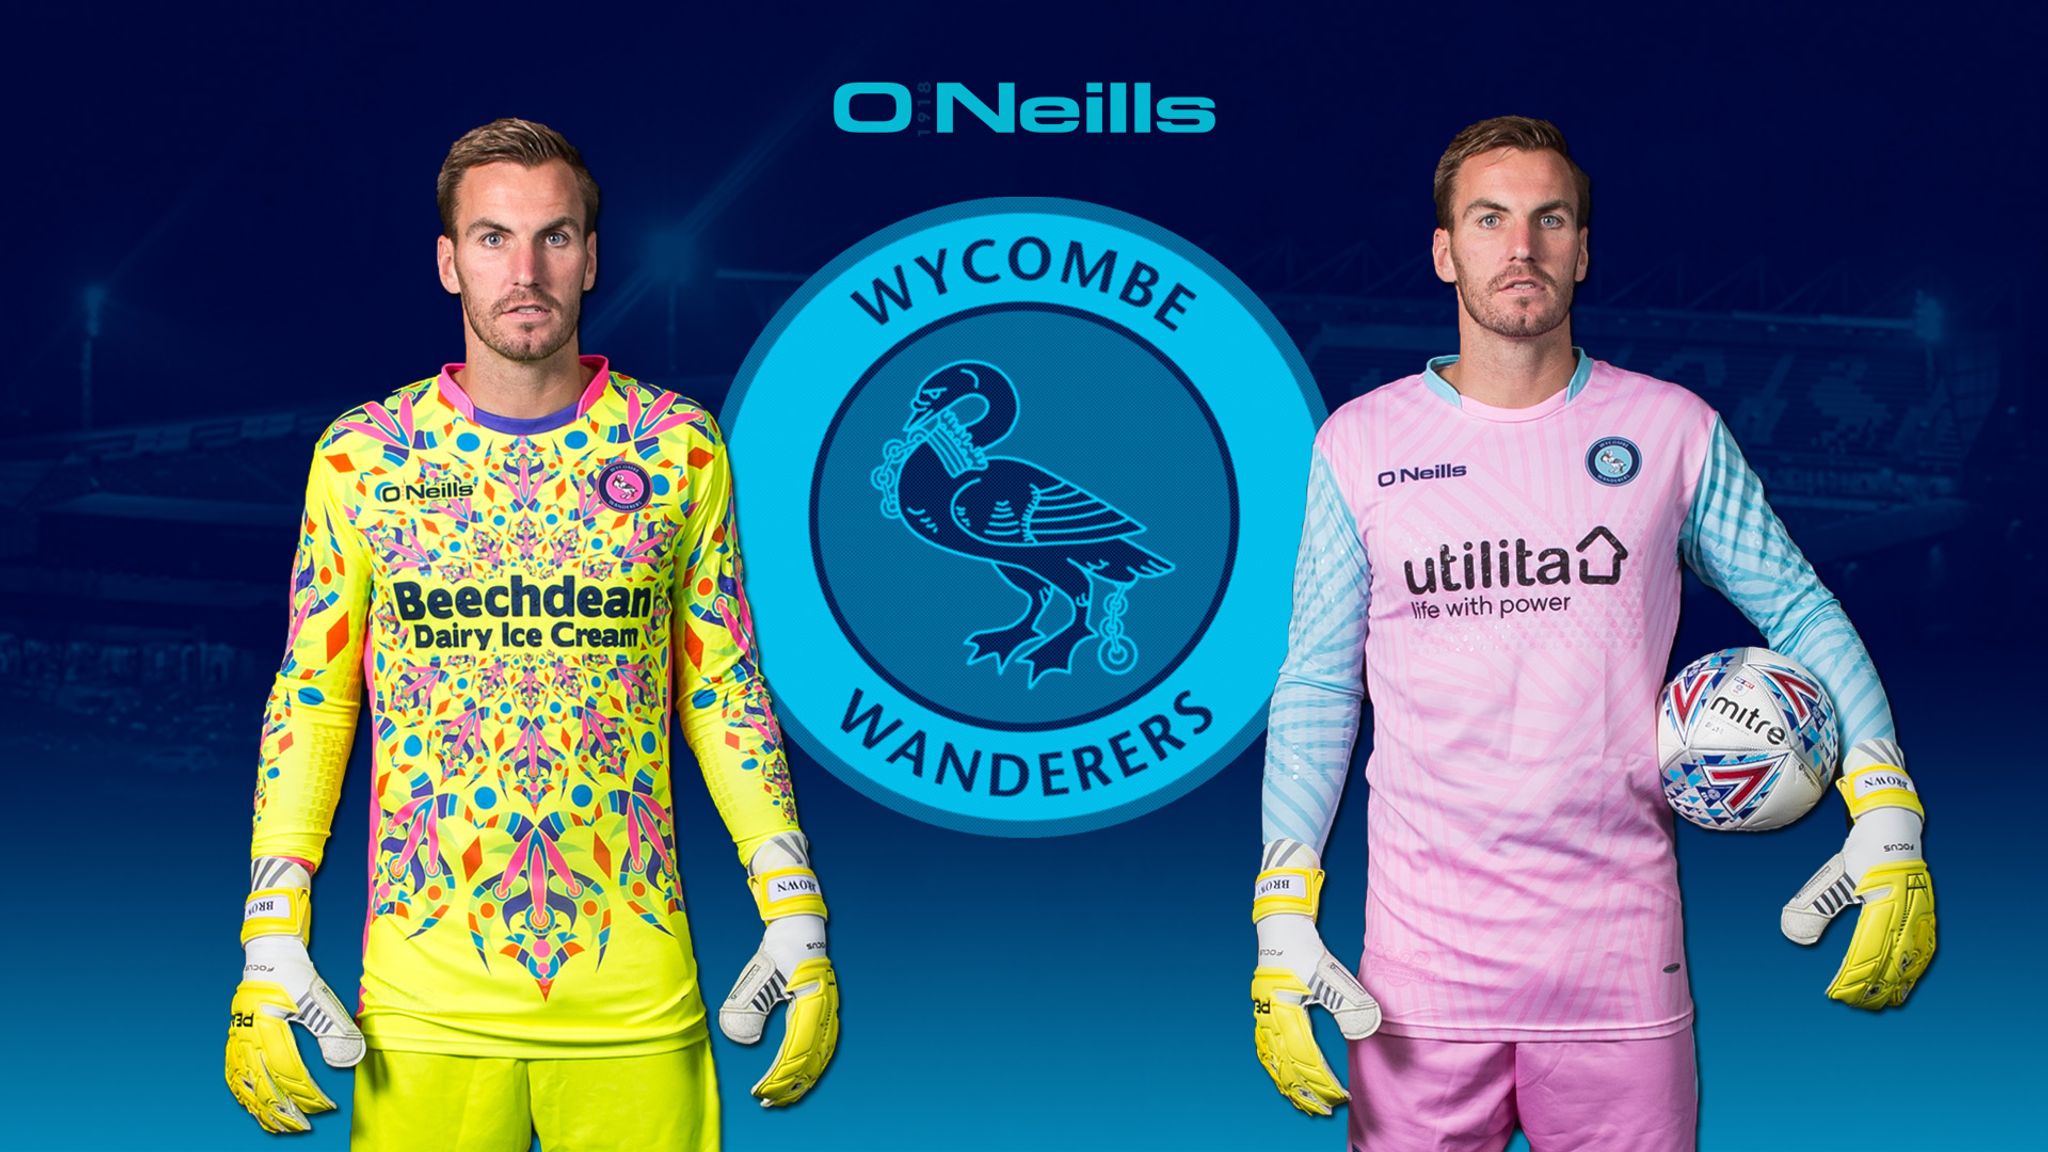 Wycombe Wanderers F.C. Wallpapers